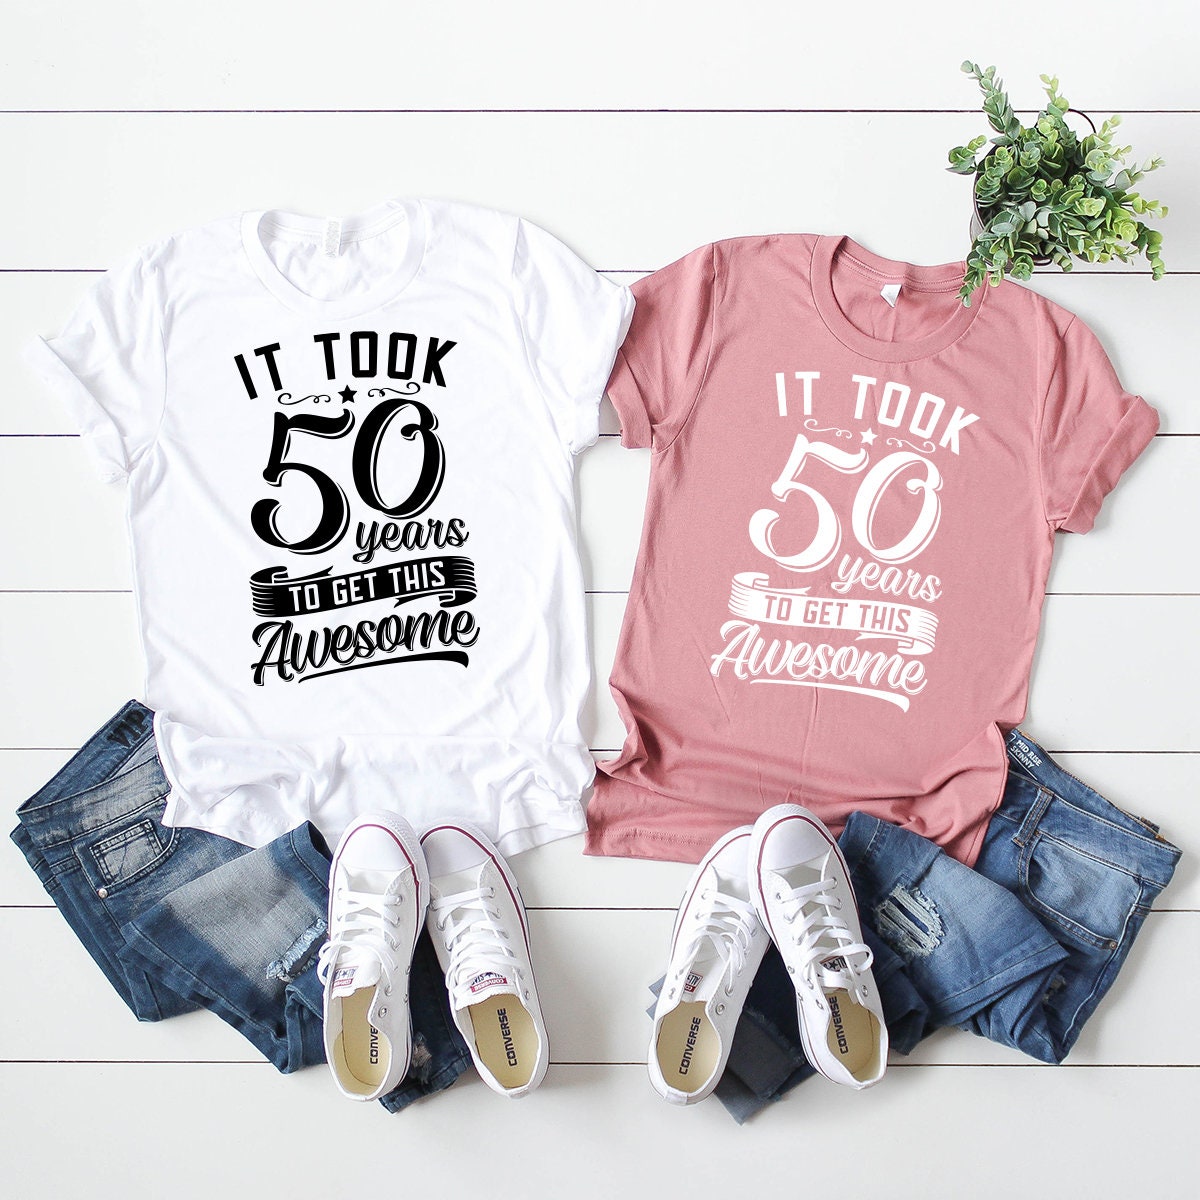 Funny Birthday Tshirt, Gift For 50 Old, 50th Birthday Shirt, Birthday Party Shirt, Awesome Birthday Shirt, 50 Years Shirt, Parents Gift - Fastdeliverytees.com